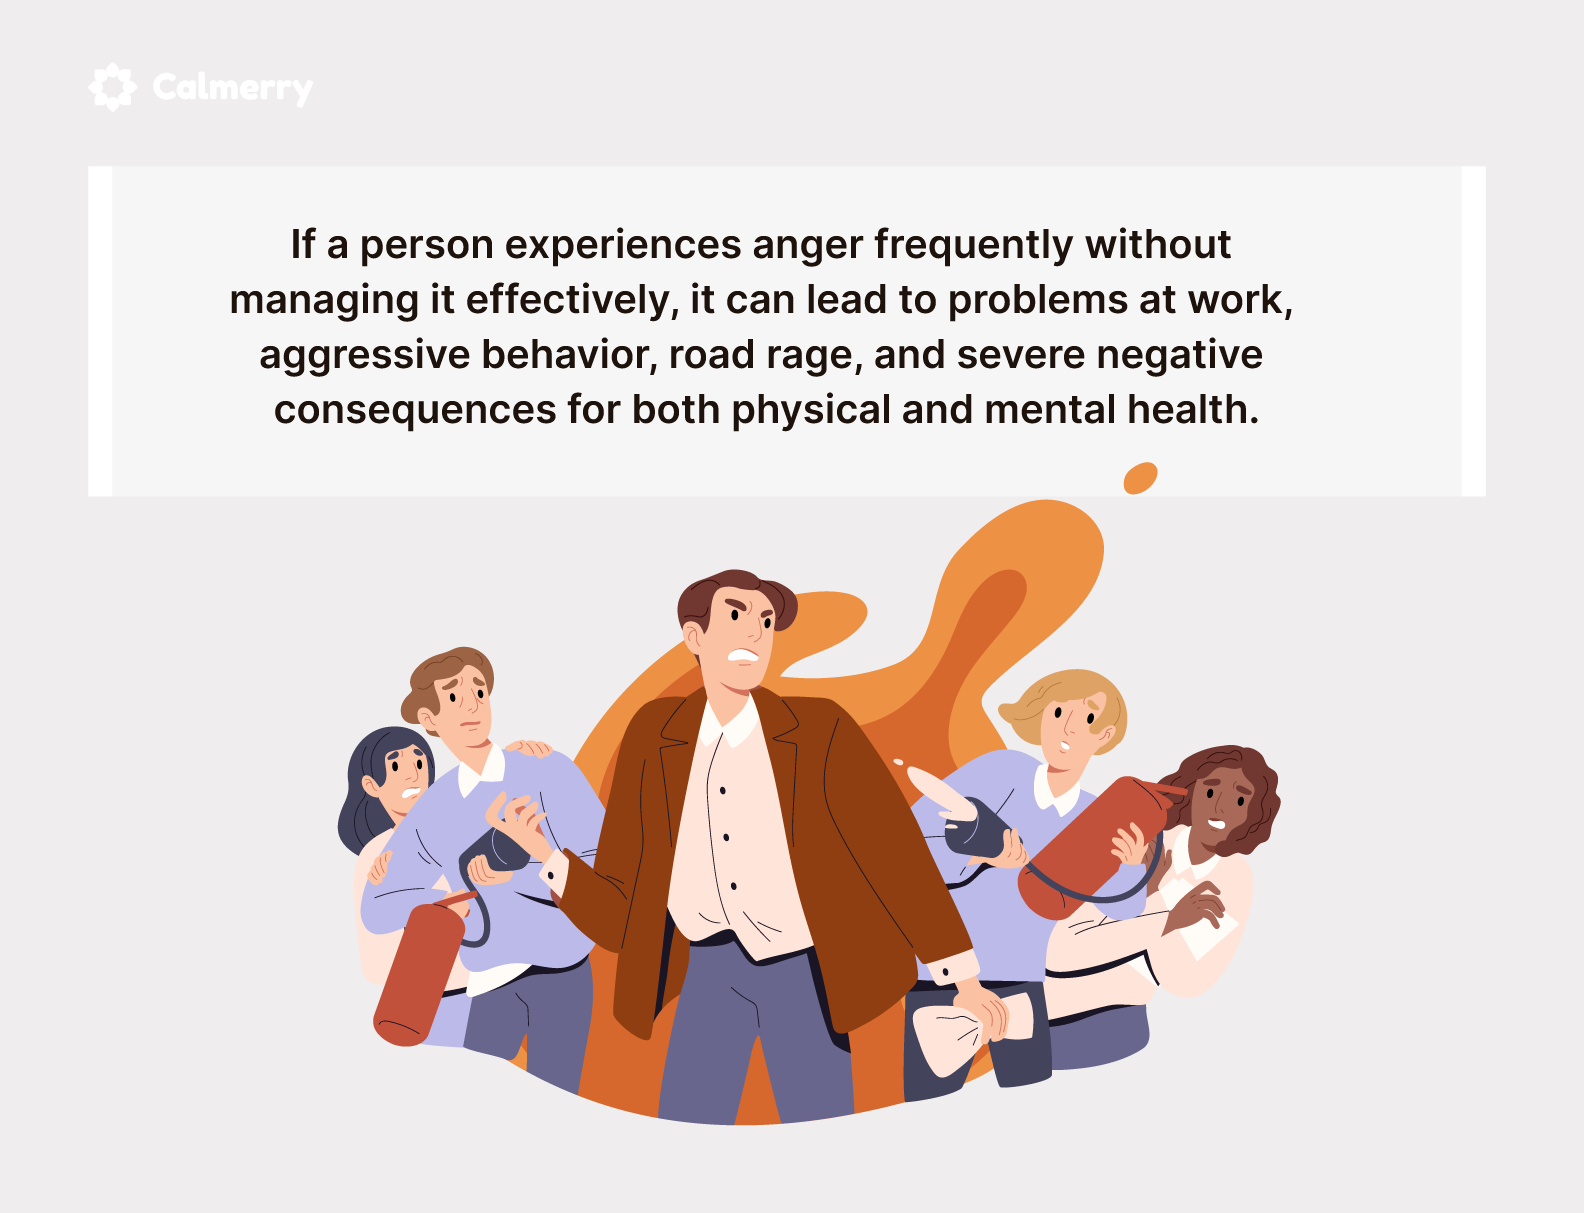 Frequent anger negatively affects physical and mental health